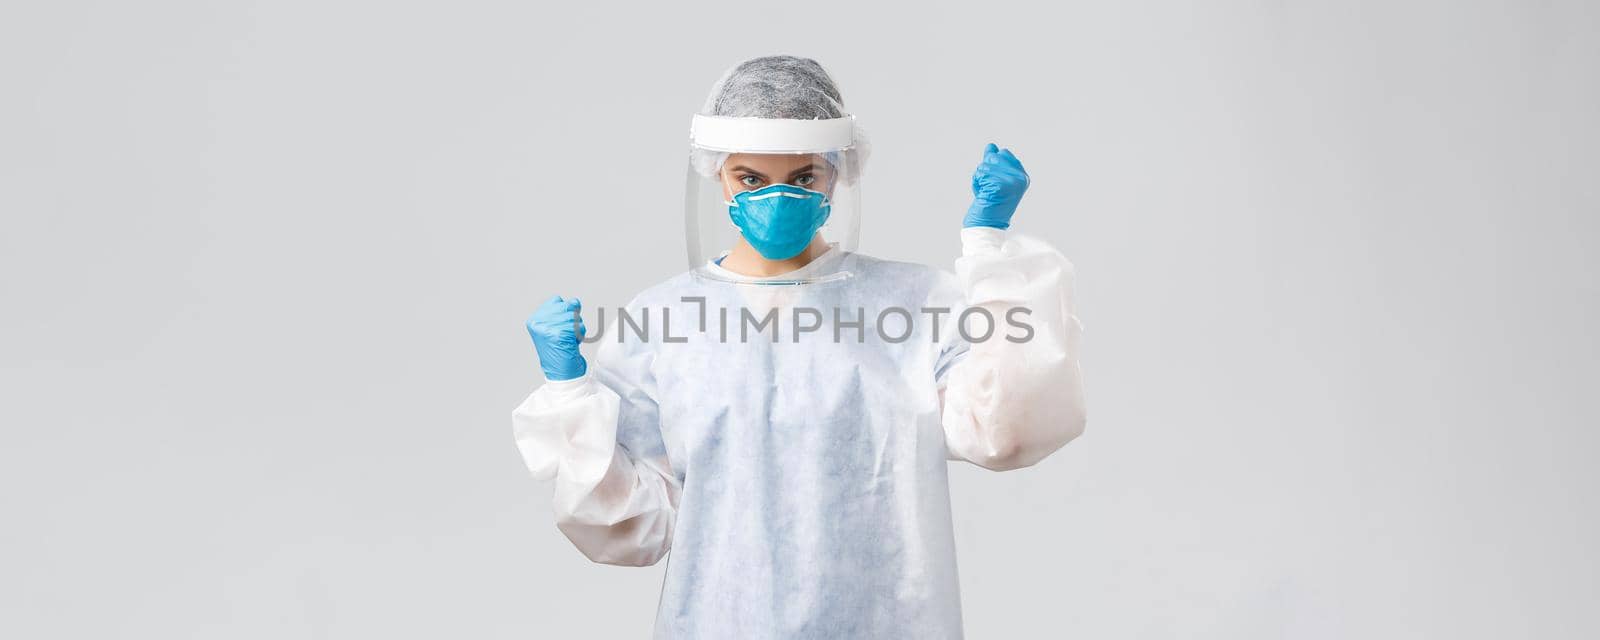 Covid-19, preventing virus, healthcare workers and quarantine concept. Confident doctor in personal protective equipment, face mask, cheering, invent coronavirus vaccine, determined cure patient.